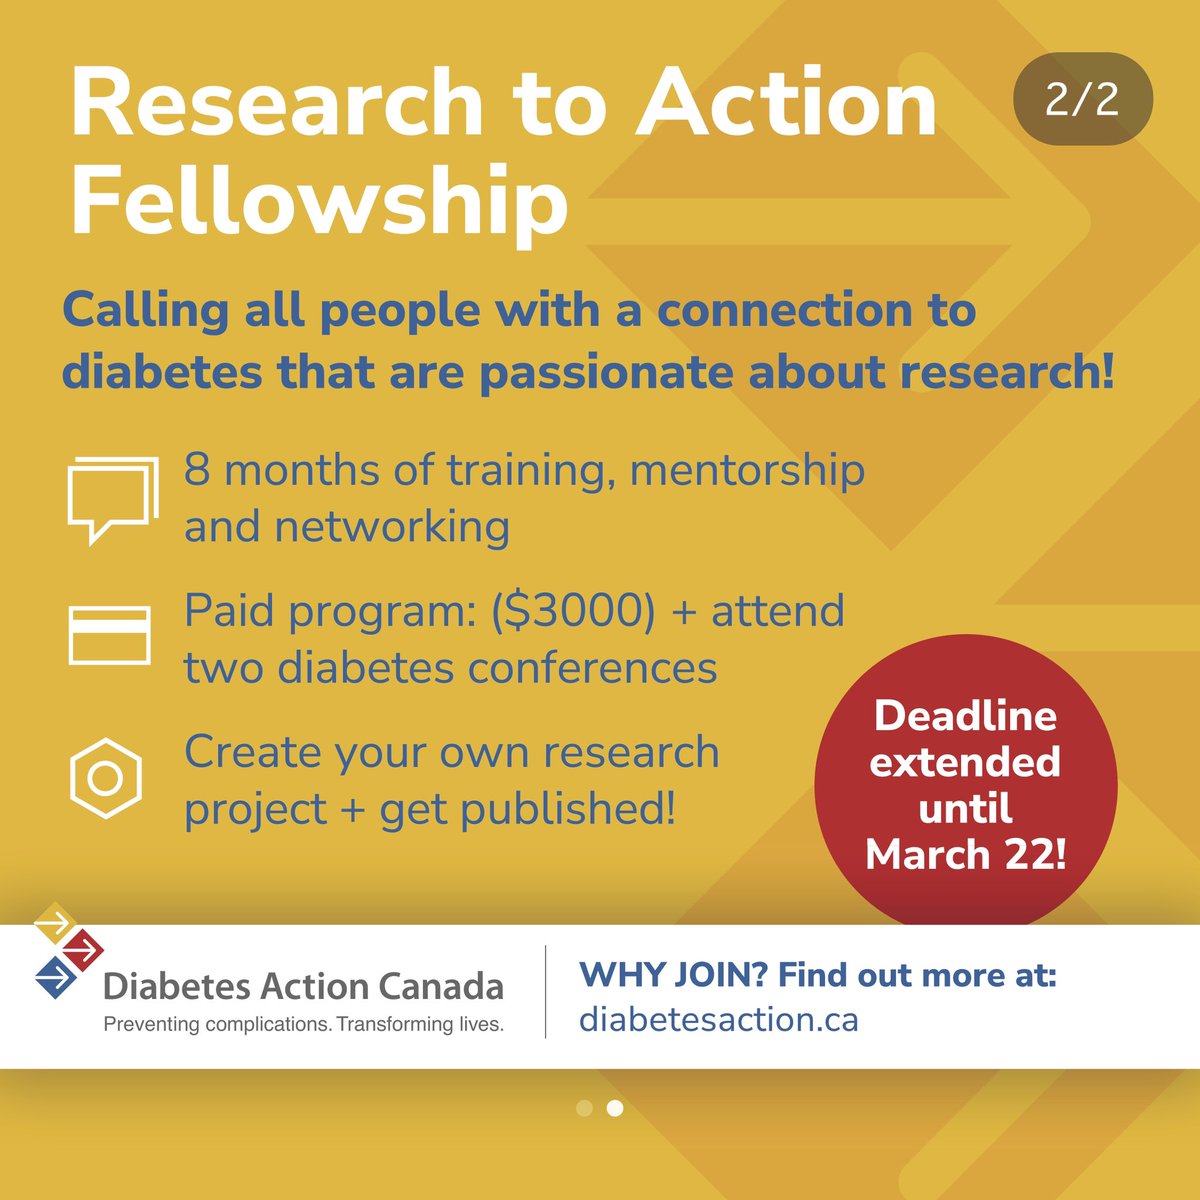 Time is ticking! Today is the last day to apply for our Research to Action Fellowship. This is a chance to lead in diabetes advocacy, gain invaluable skills, and join a network of changemakers. Apply today and be the change you want to see. diabetesaction.ca/research-to-ac…